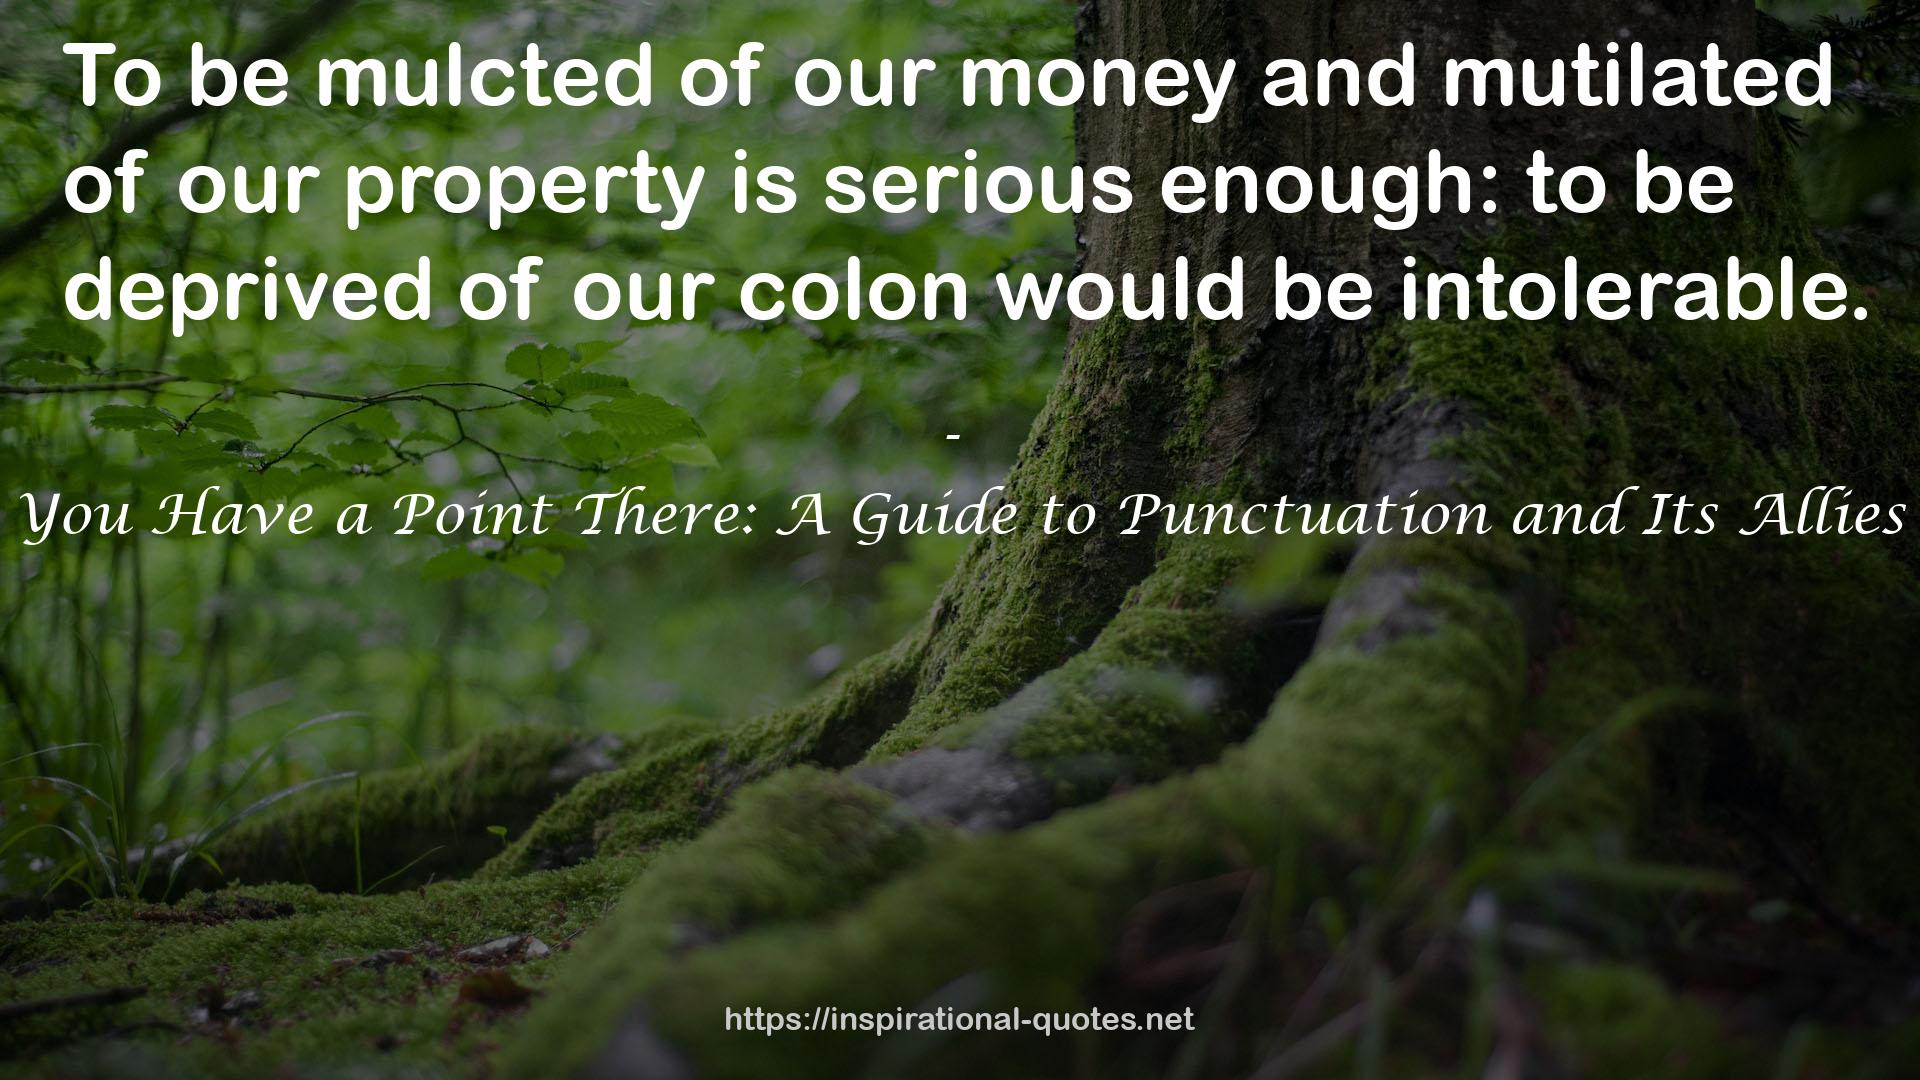 You Have a Point There: A Guide to Punctuation and Its Allies QUOTES